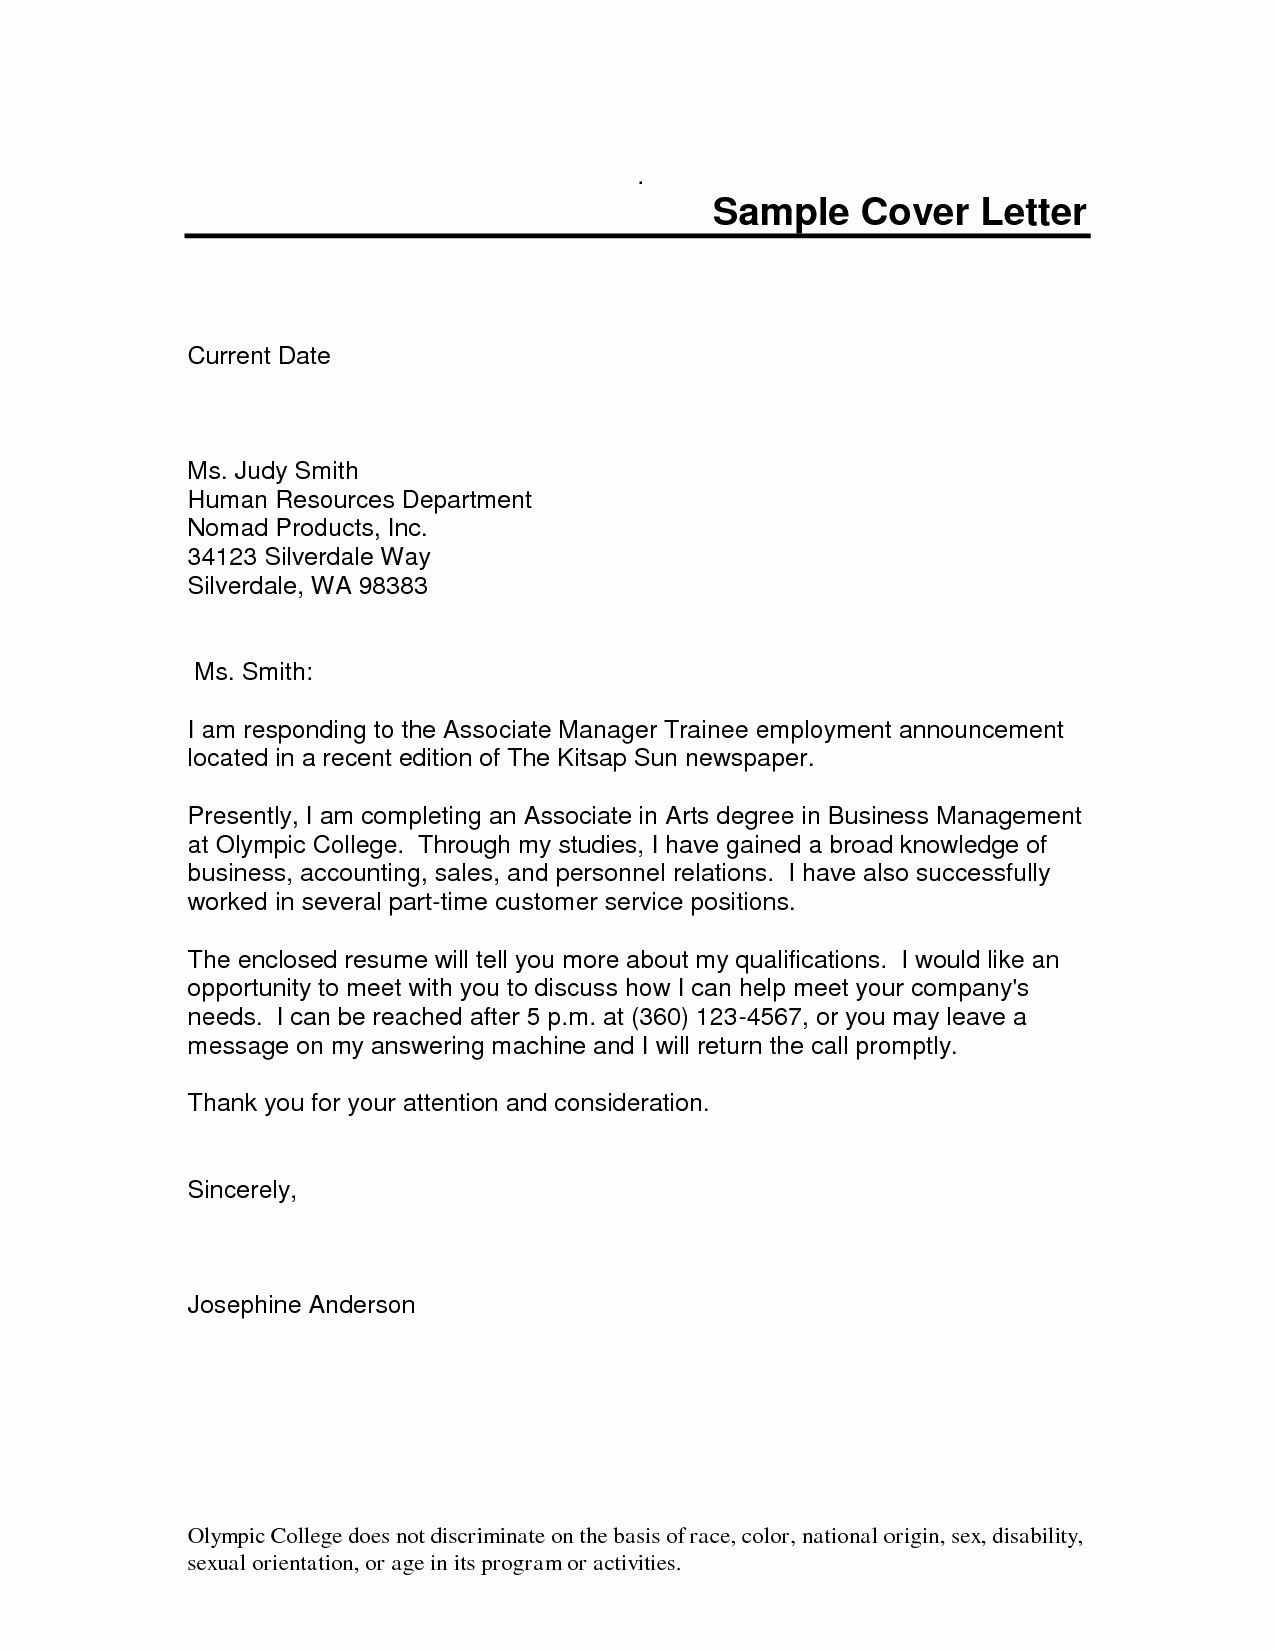 Formal Letter Template Microsoft Word Luxury Letter Template Word